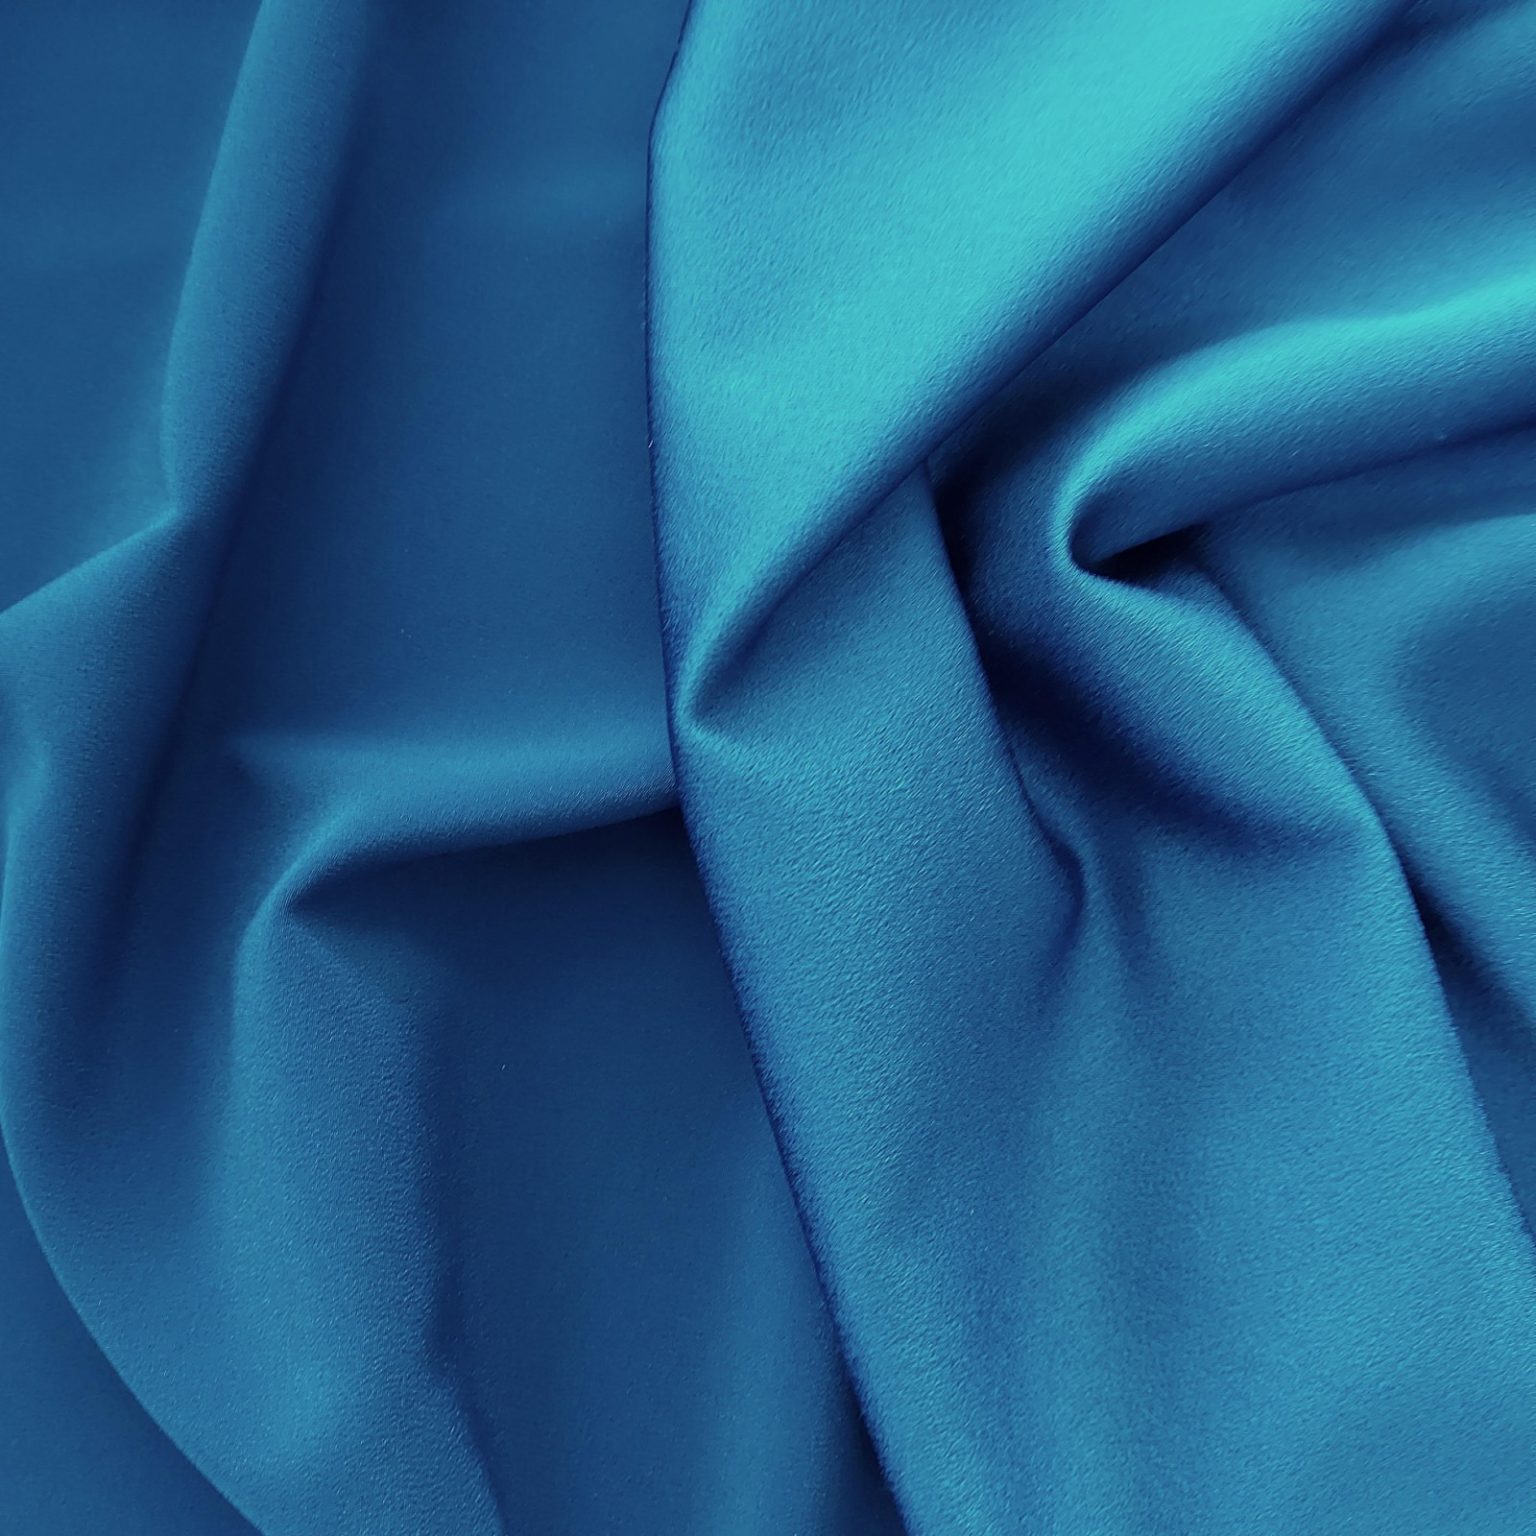 Dress Fabric | Teal Satin Back Crepe Polyester | More Sewing